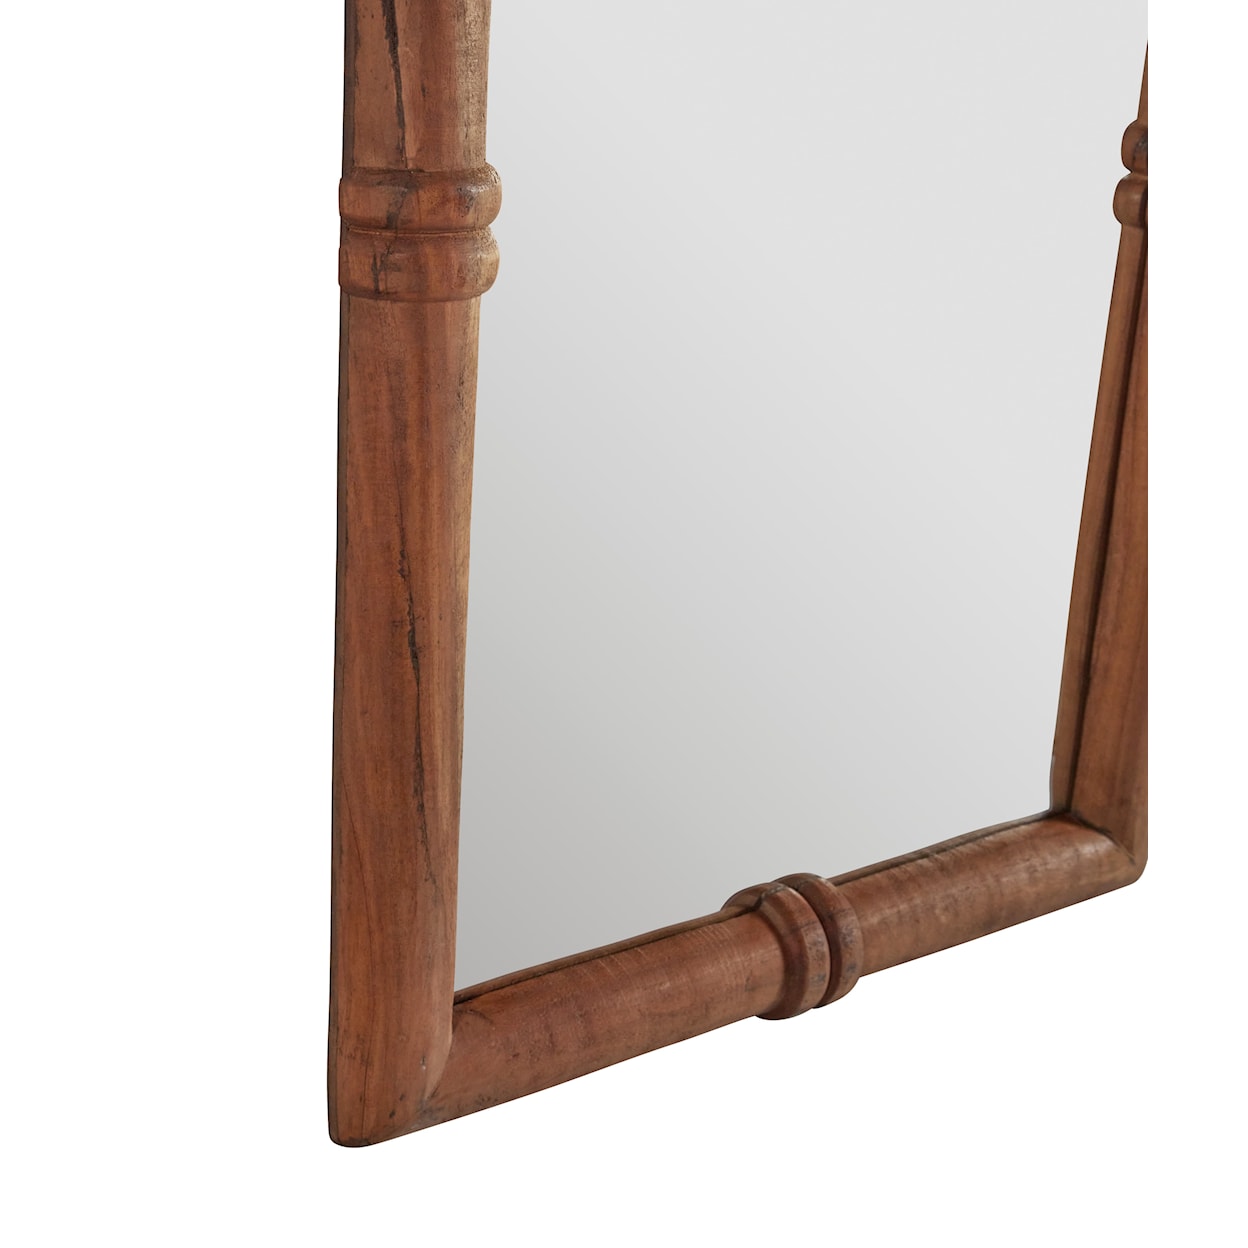 BOBO Intriguing Objects BOBO Intriguing Objects Mirror with Wooden Spool Frame